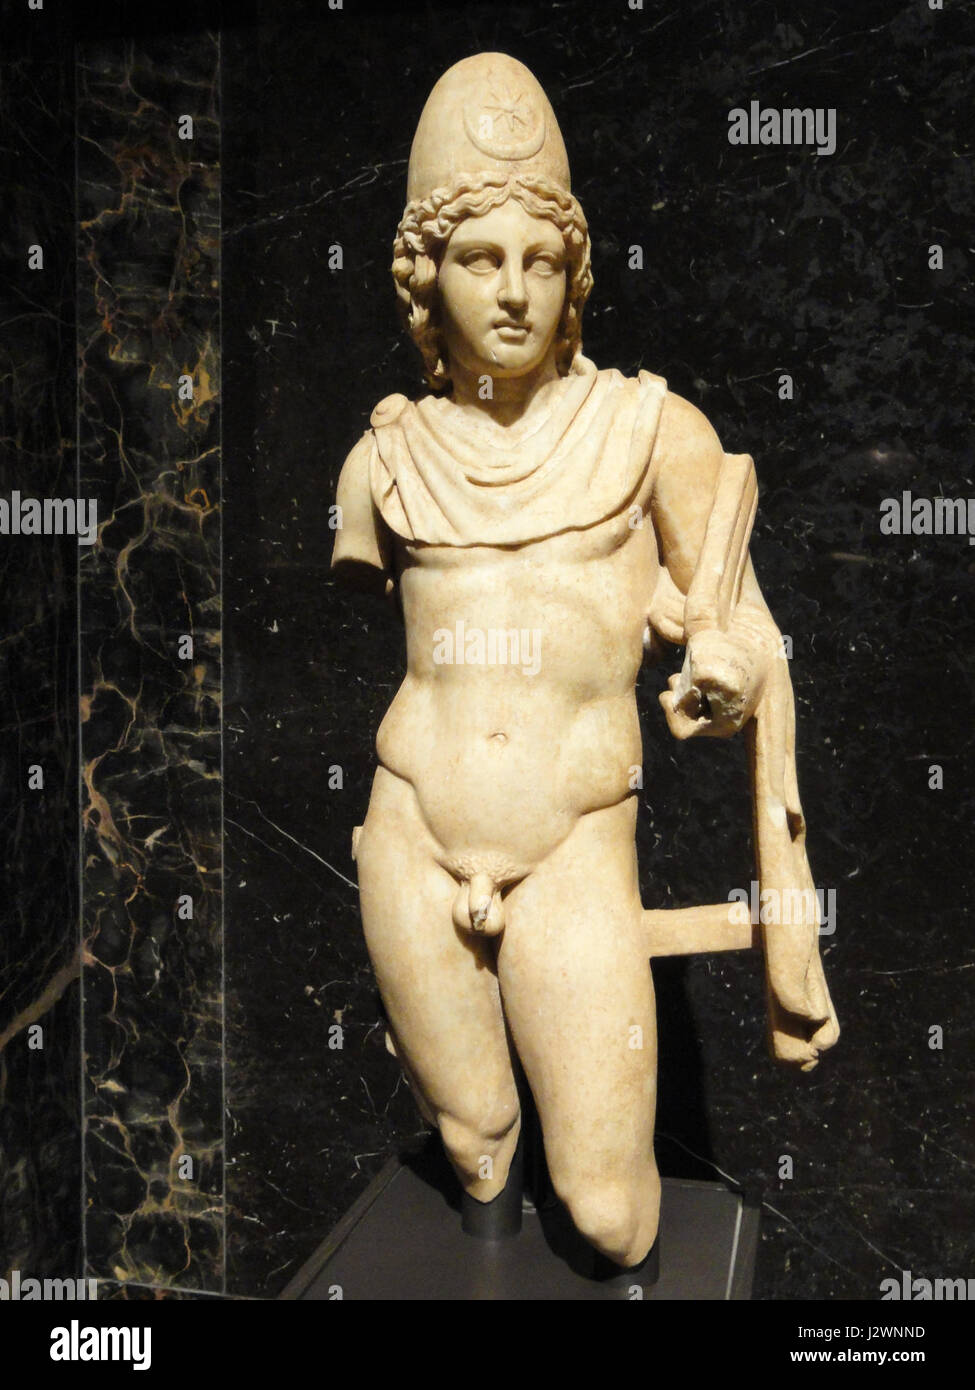 Castor or Pollux, probably Italy, 2nd century CE - Nelson-Atkins Museum of Art - DSC08246 Stock Photo